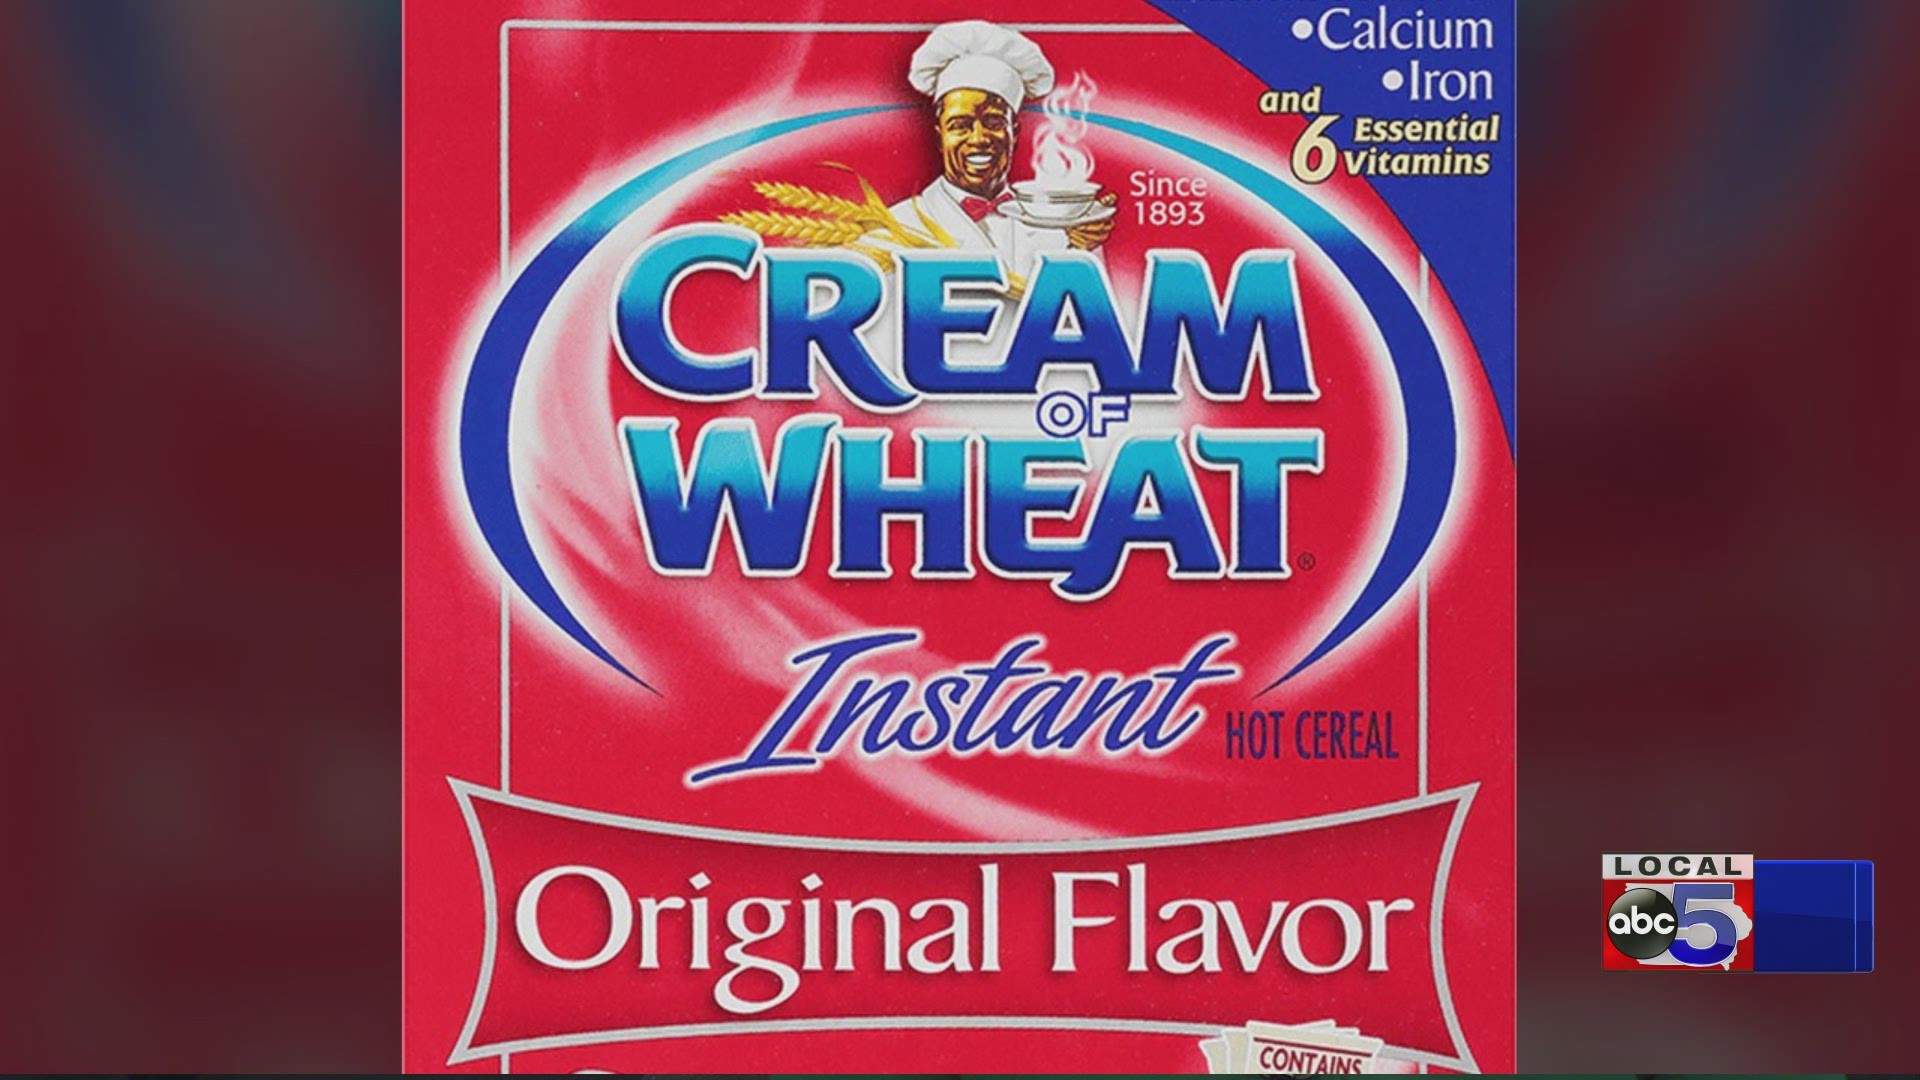 Cream of Wheat reviewing chef mascot following Aunt Jemima, Uncle Ben's announcements